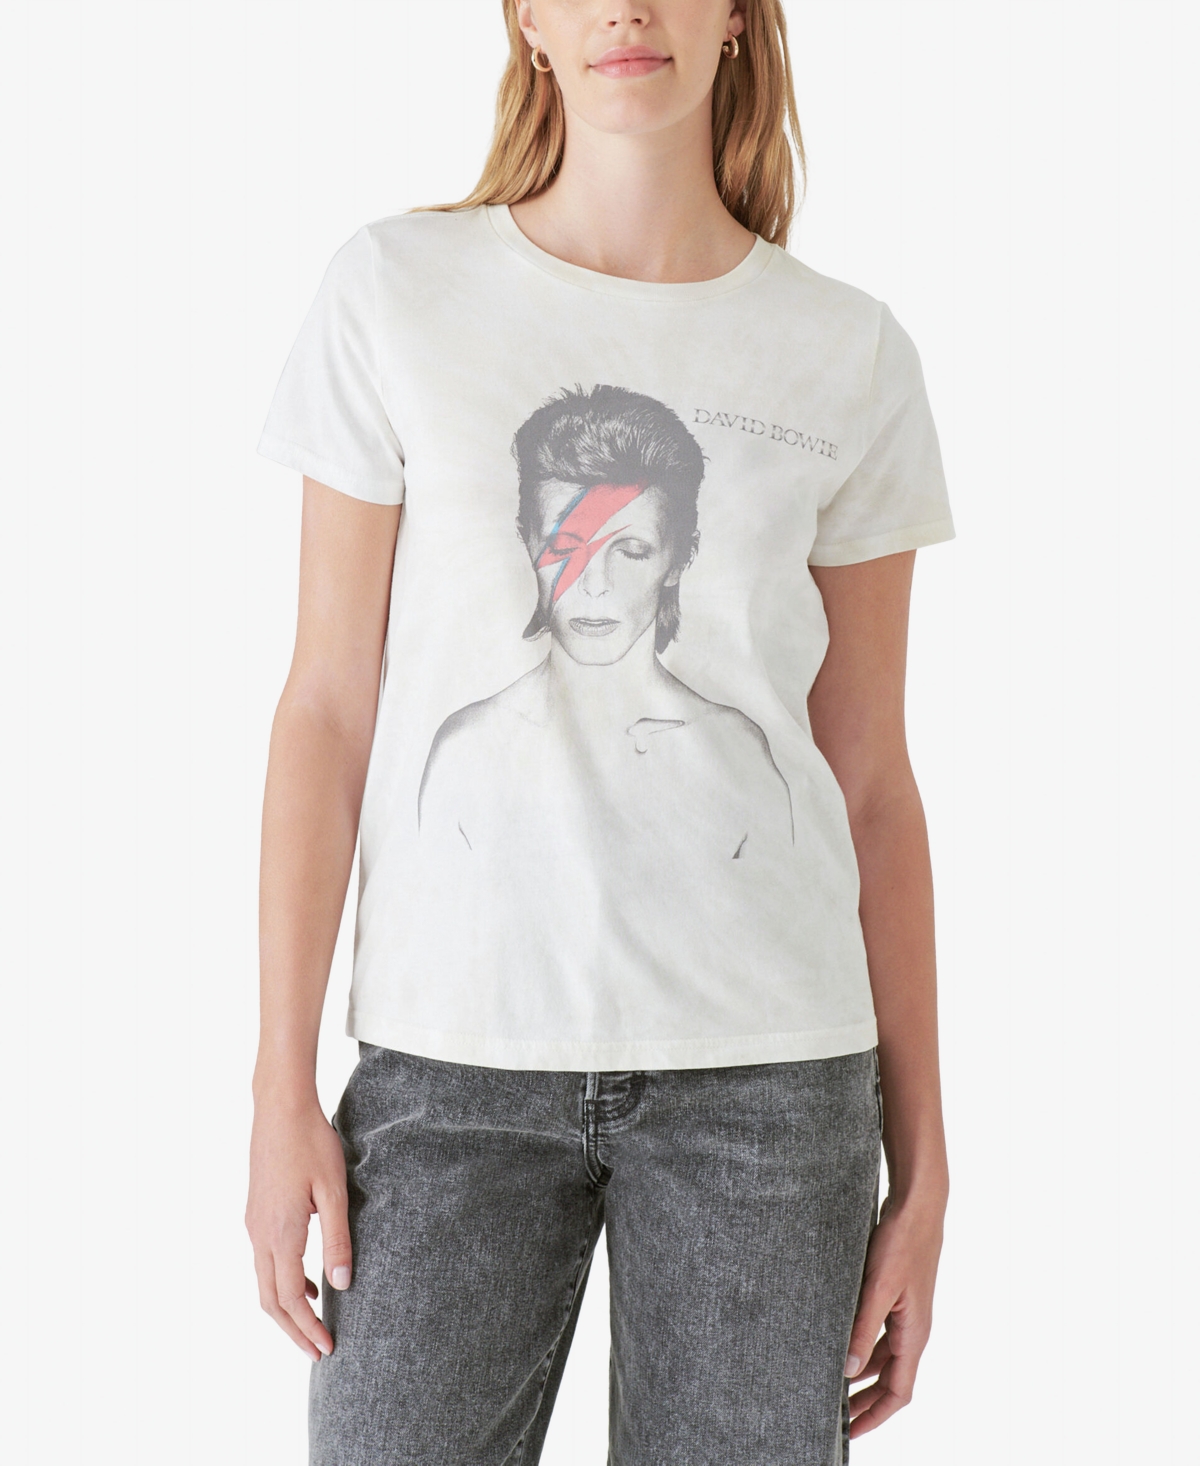 LUCKY BRAND WOMEN'S BOWIE COVER CLASSIC GRAPHIC T-SHIRT